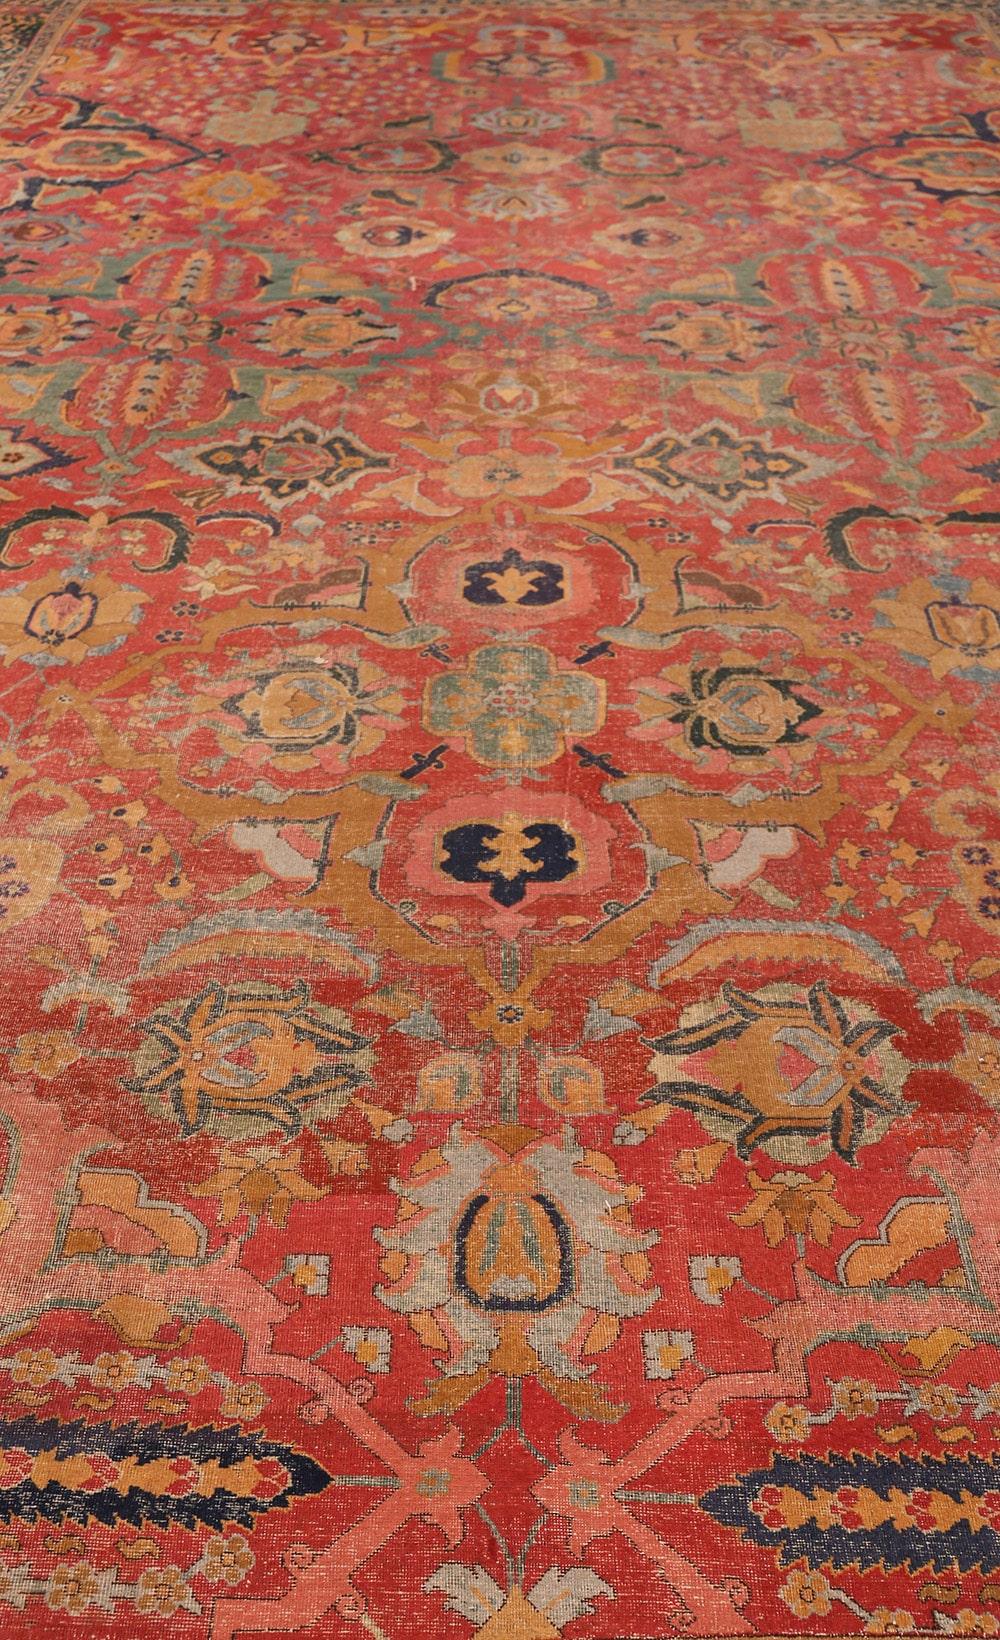 17th Century Antique Persian Isfahan Rug. Size: 11 ft 10 in x 18 ft 1 in 4